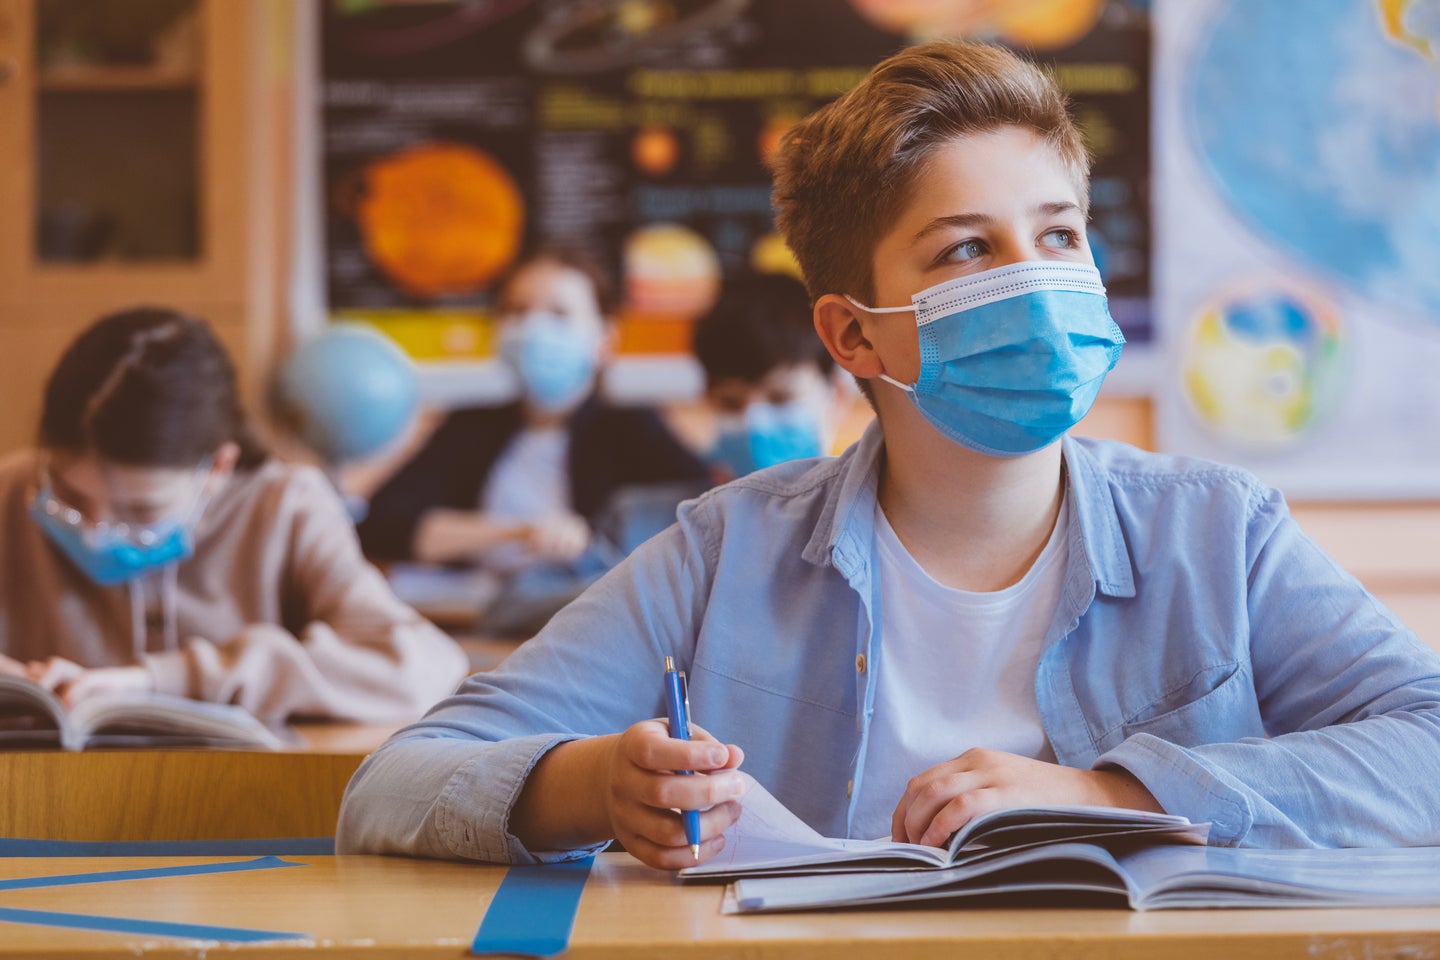 High school students at school, wearing N95 Face masks. Teenage boy sitting at the school desk, looking away and thinking.